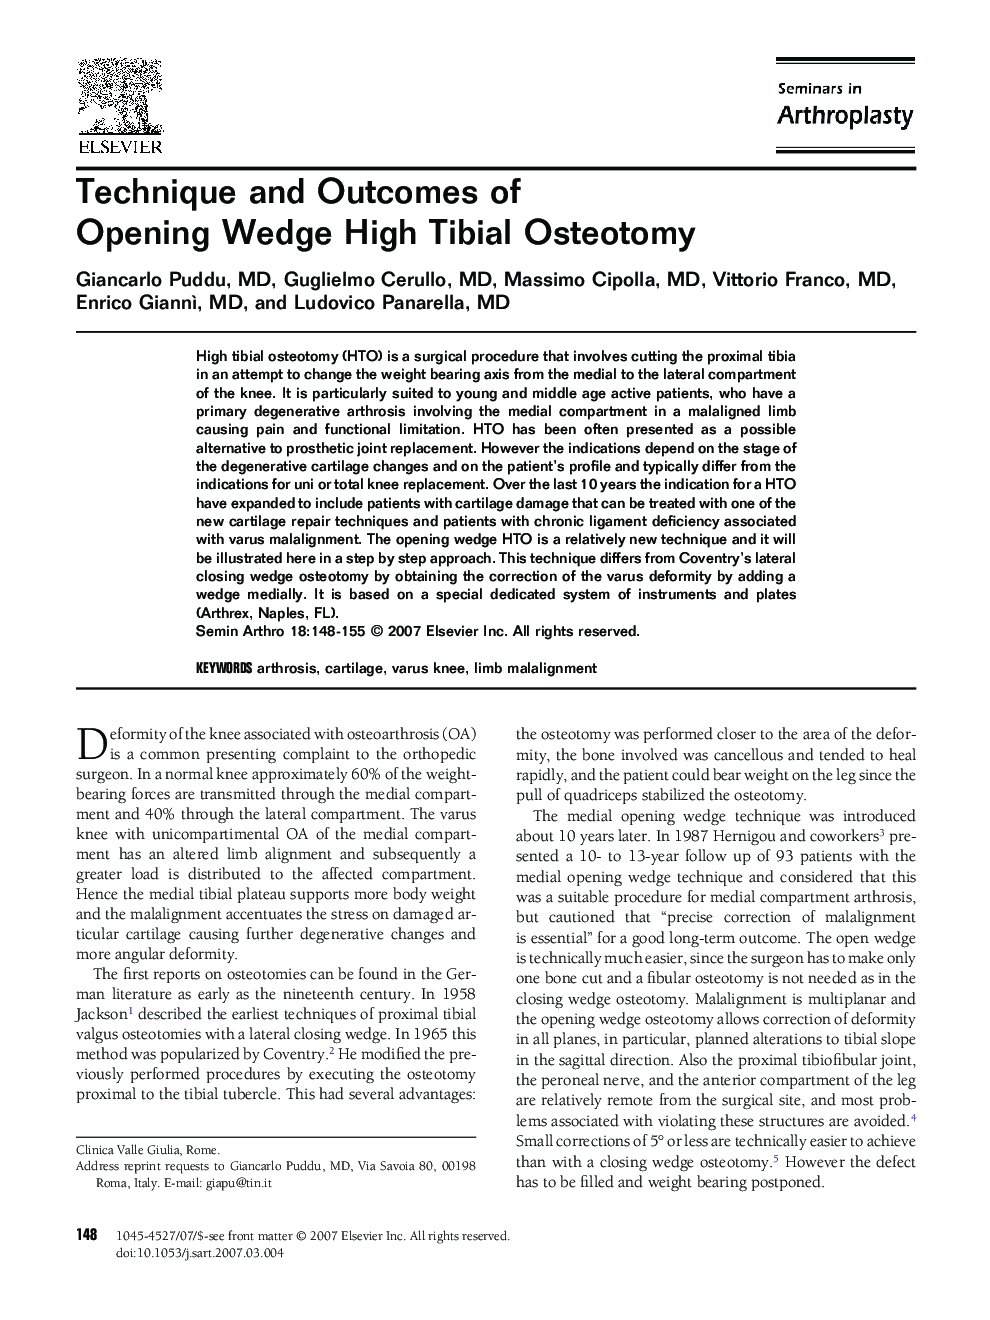 Technique and Outcomes of Opening Wedge High Tibial Osteotomy